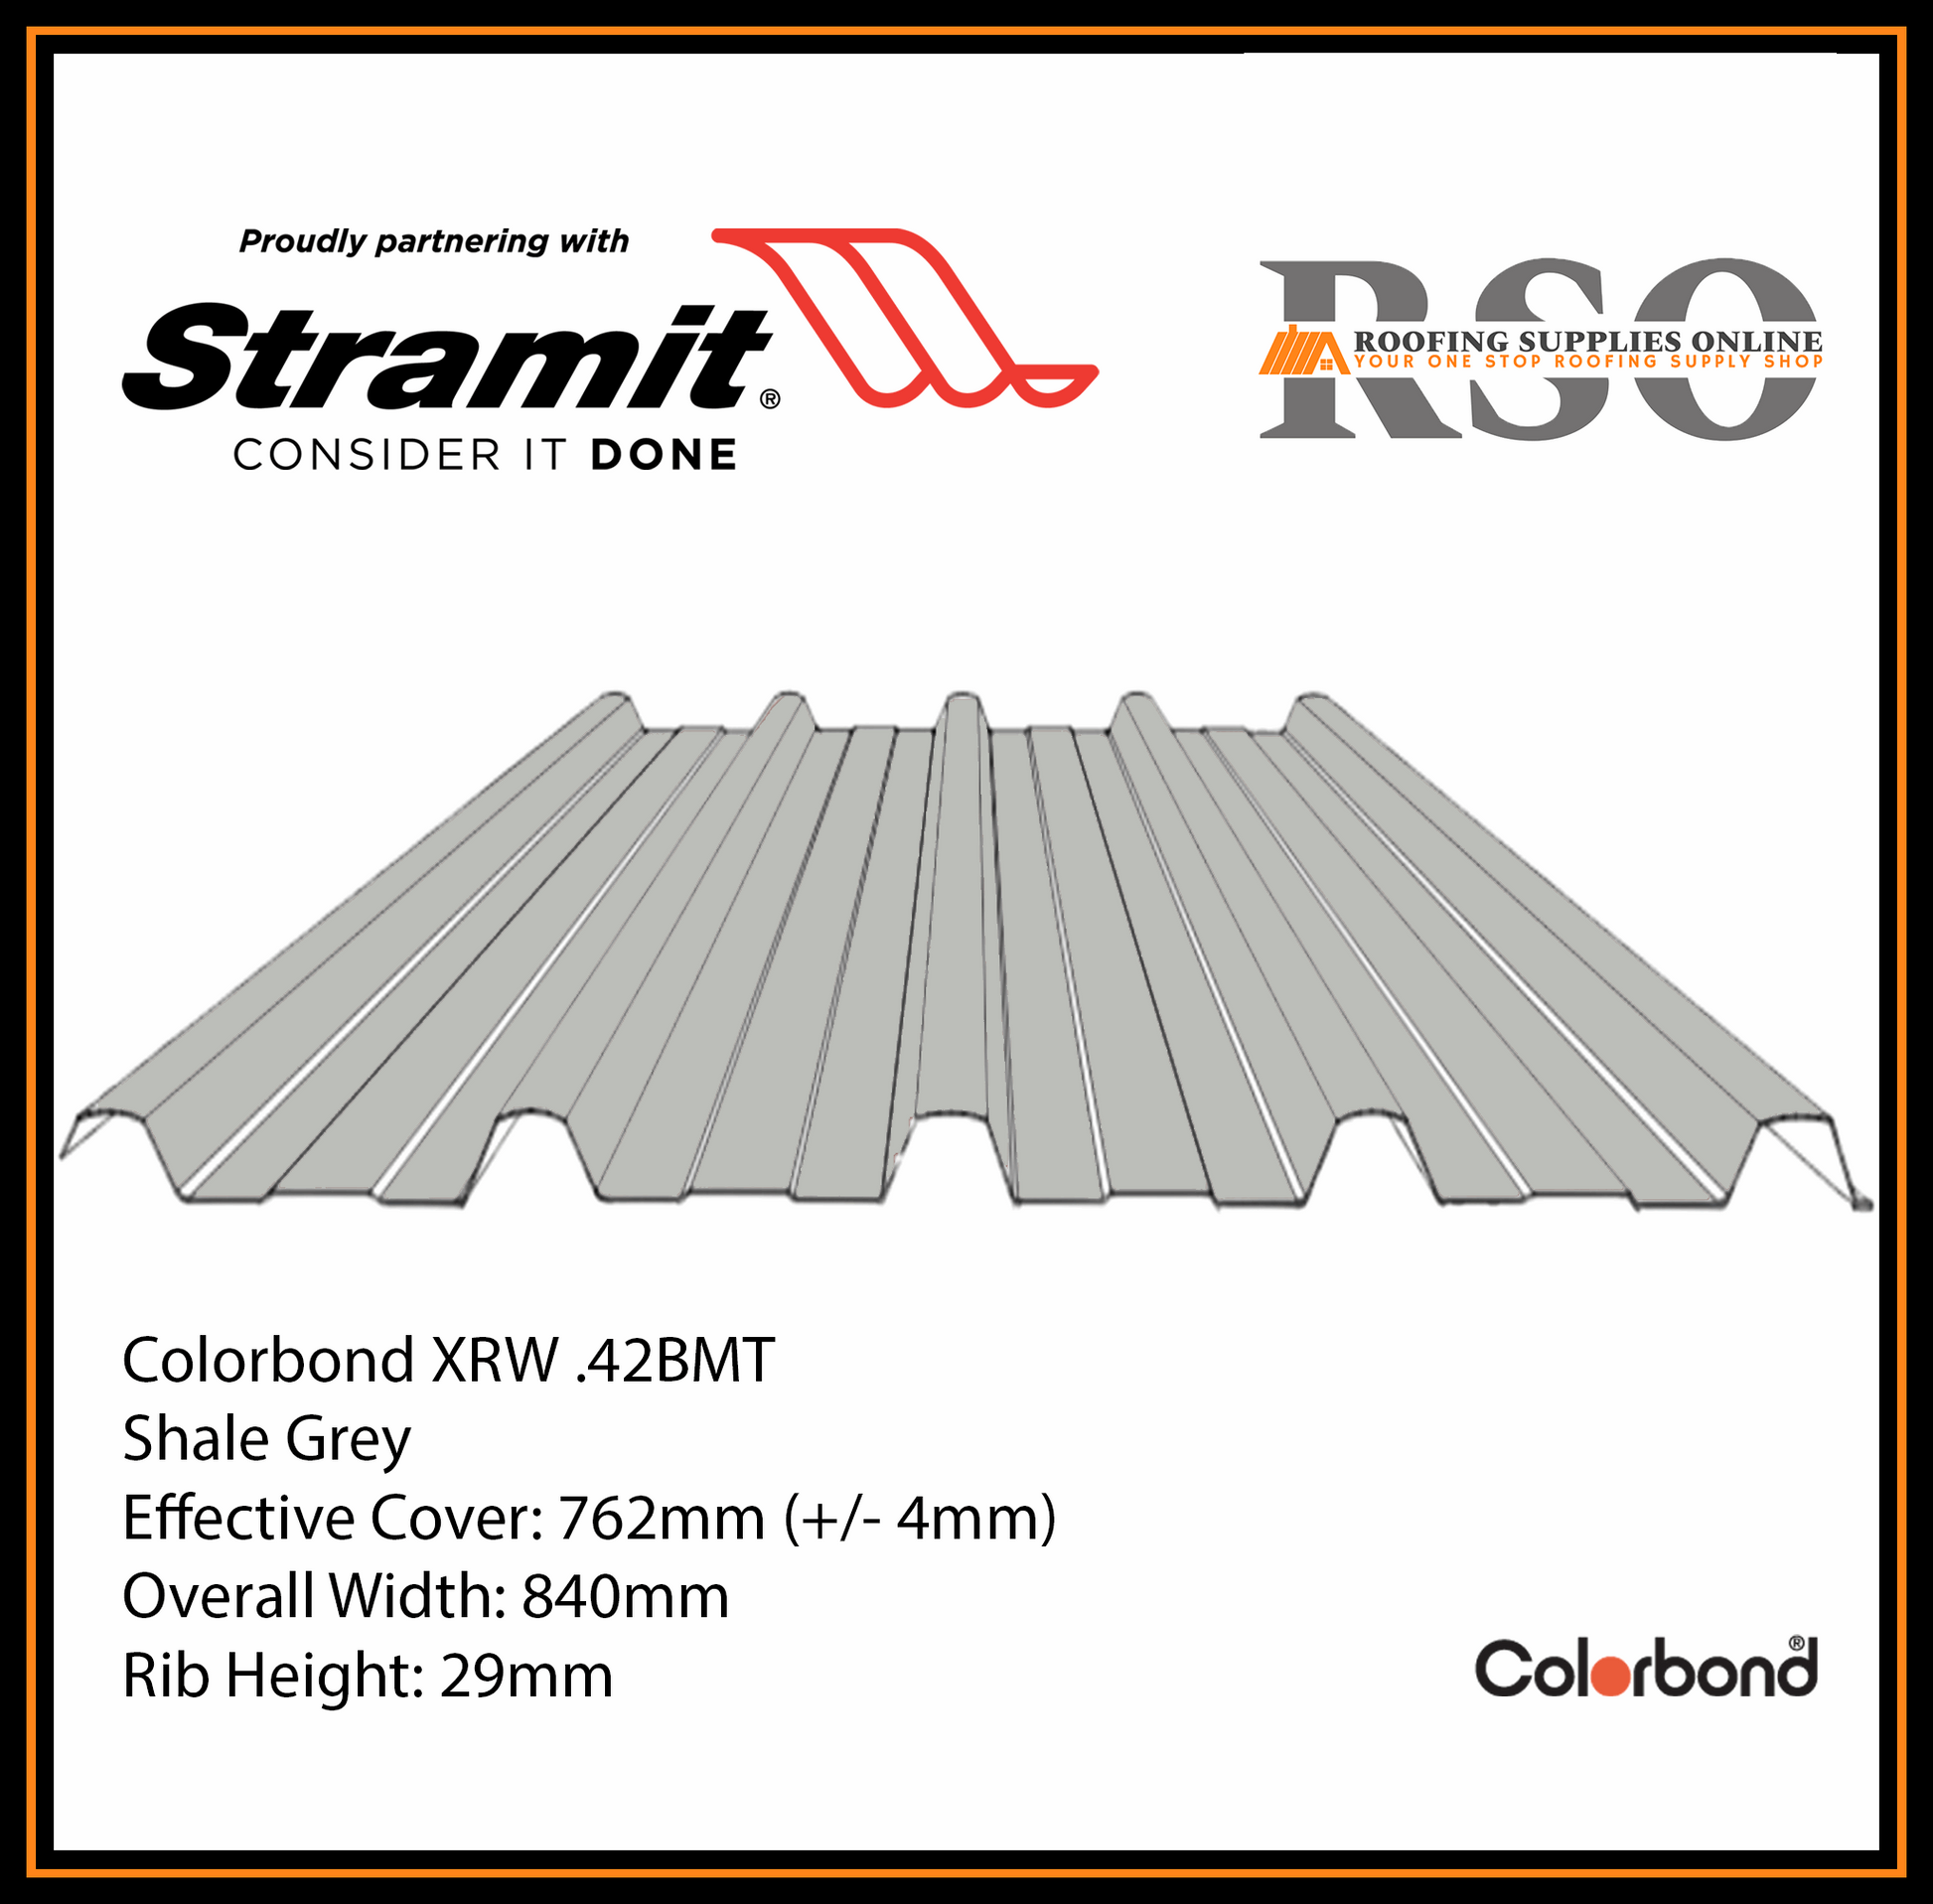 This is an illustration of a Monoclad profile roof sheet which is also known as 5 Rib or Trimdek profile. This Roof sheet's colour is called Shale Grey.